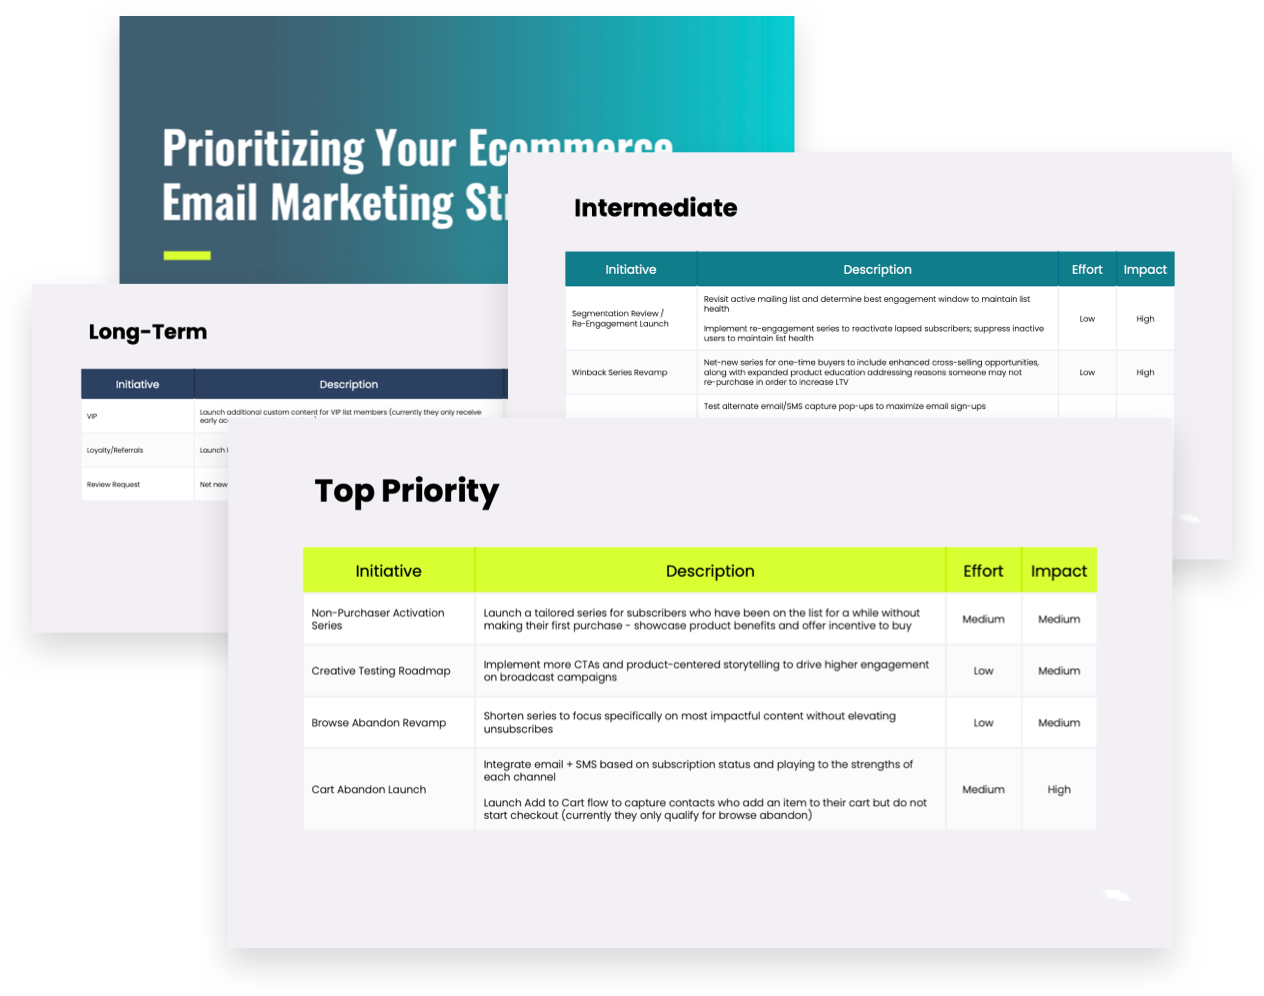 Prioritizing Your Ecommerce Email Marketing Strategy